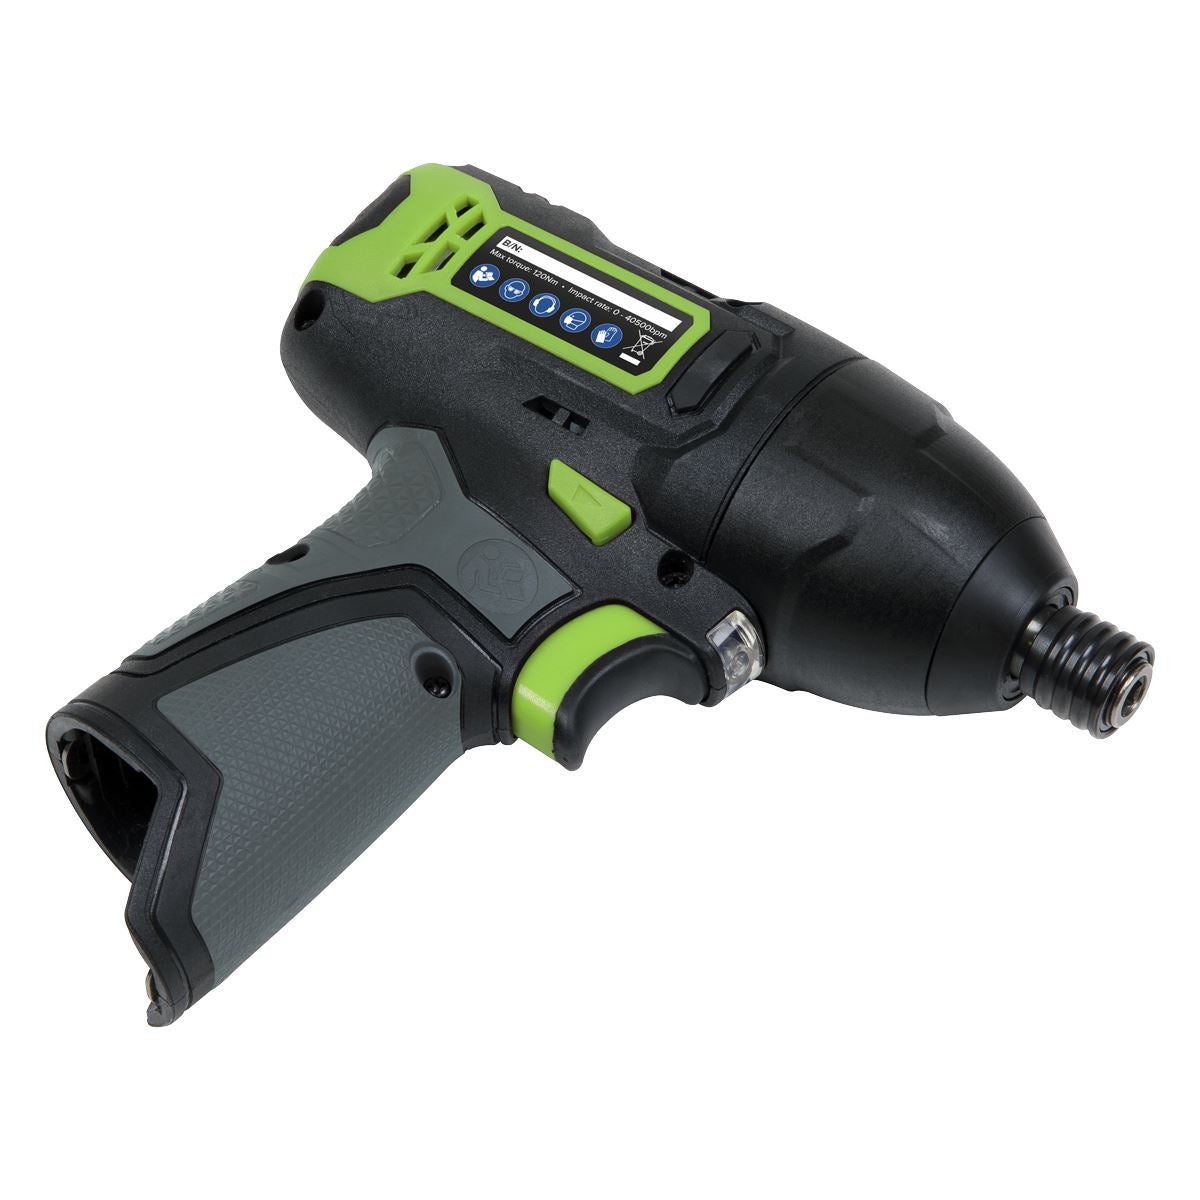 Sealey Cordless Impact Driver 1/4"Hex Drive 10.8V SV10.8 Series - Body Only